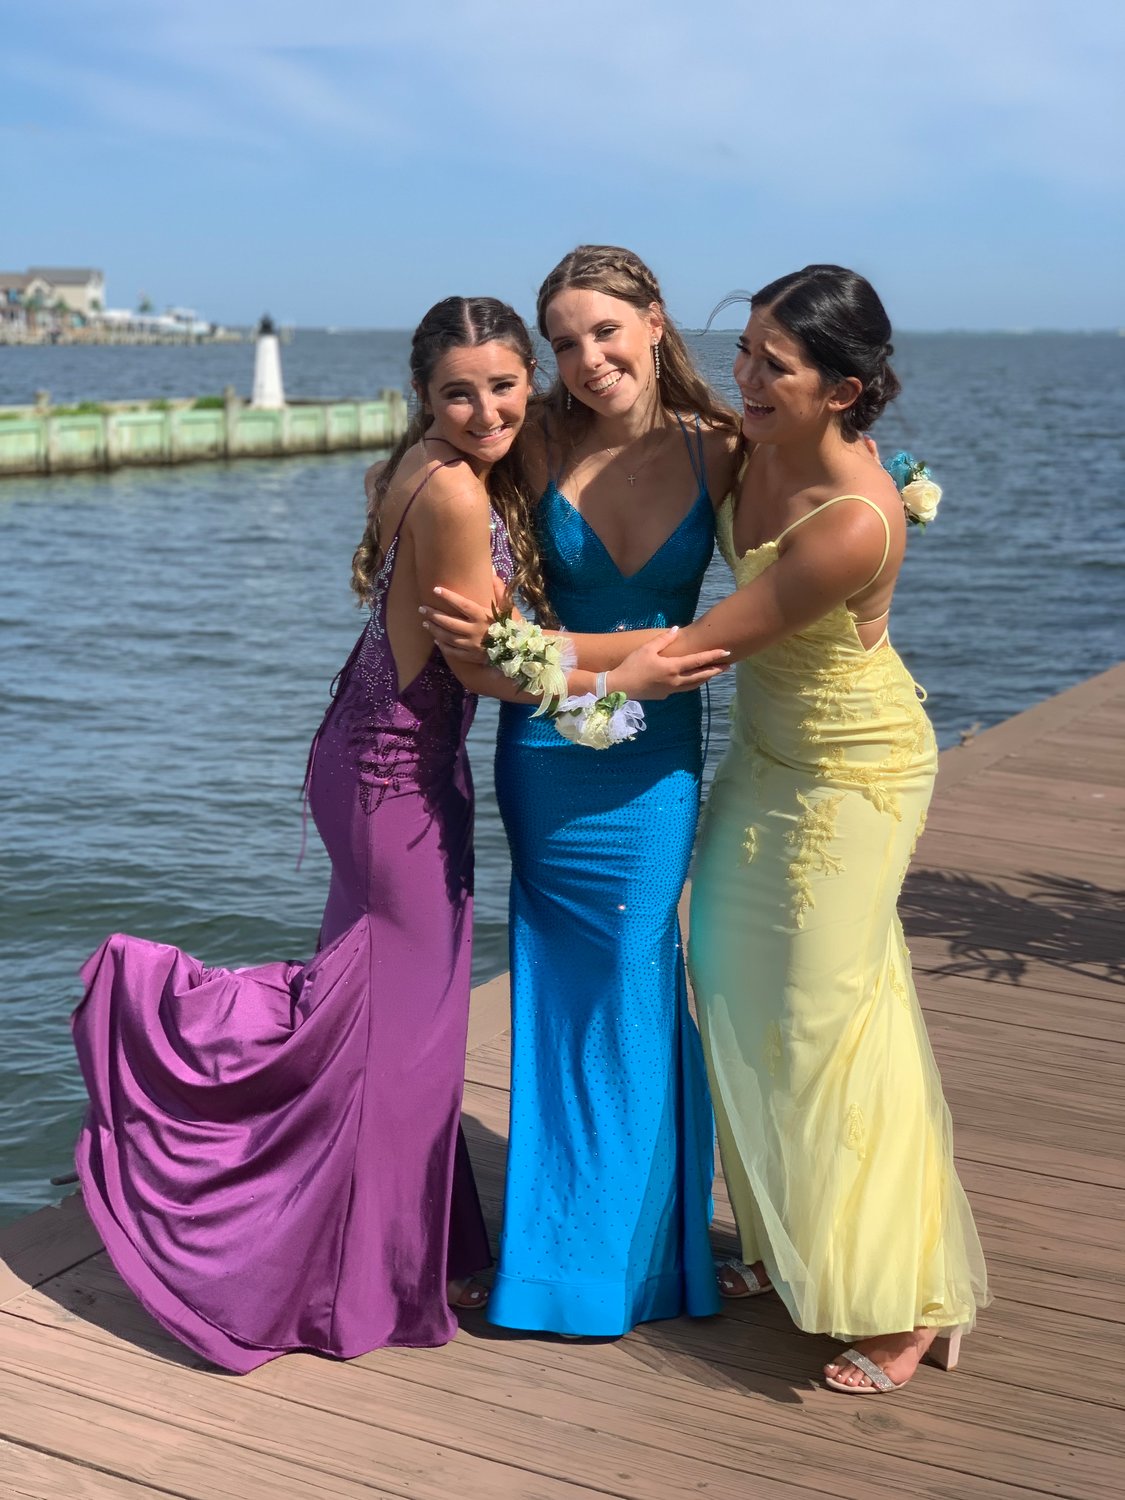 Alyssa Donnelly, Brynn Scharf, and Nina Westerlind pose for the camera.